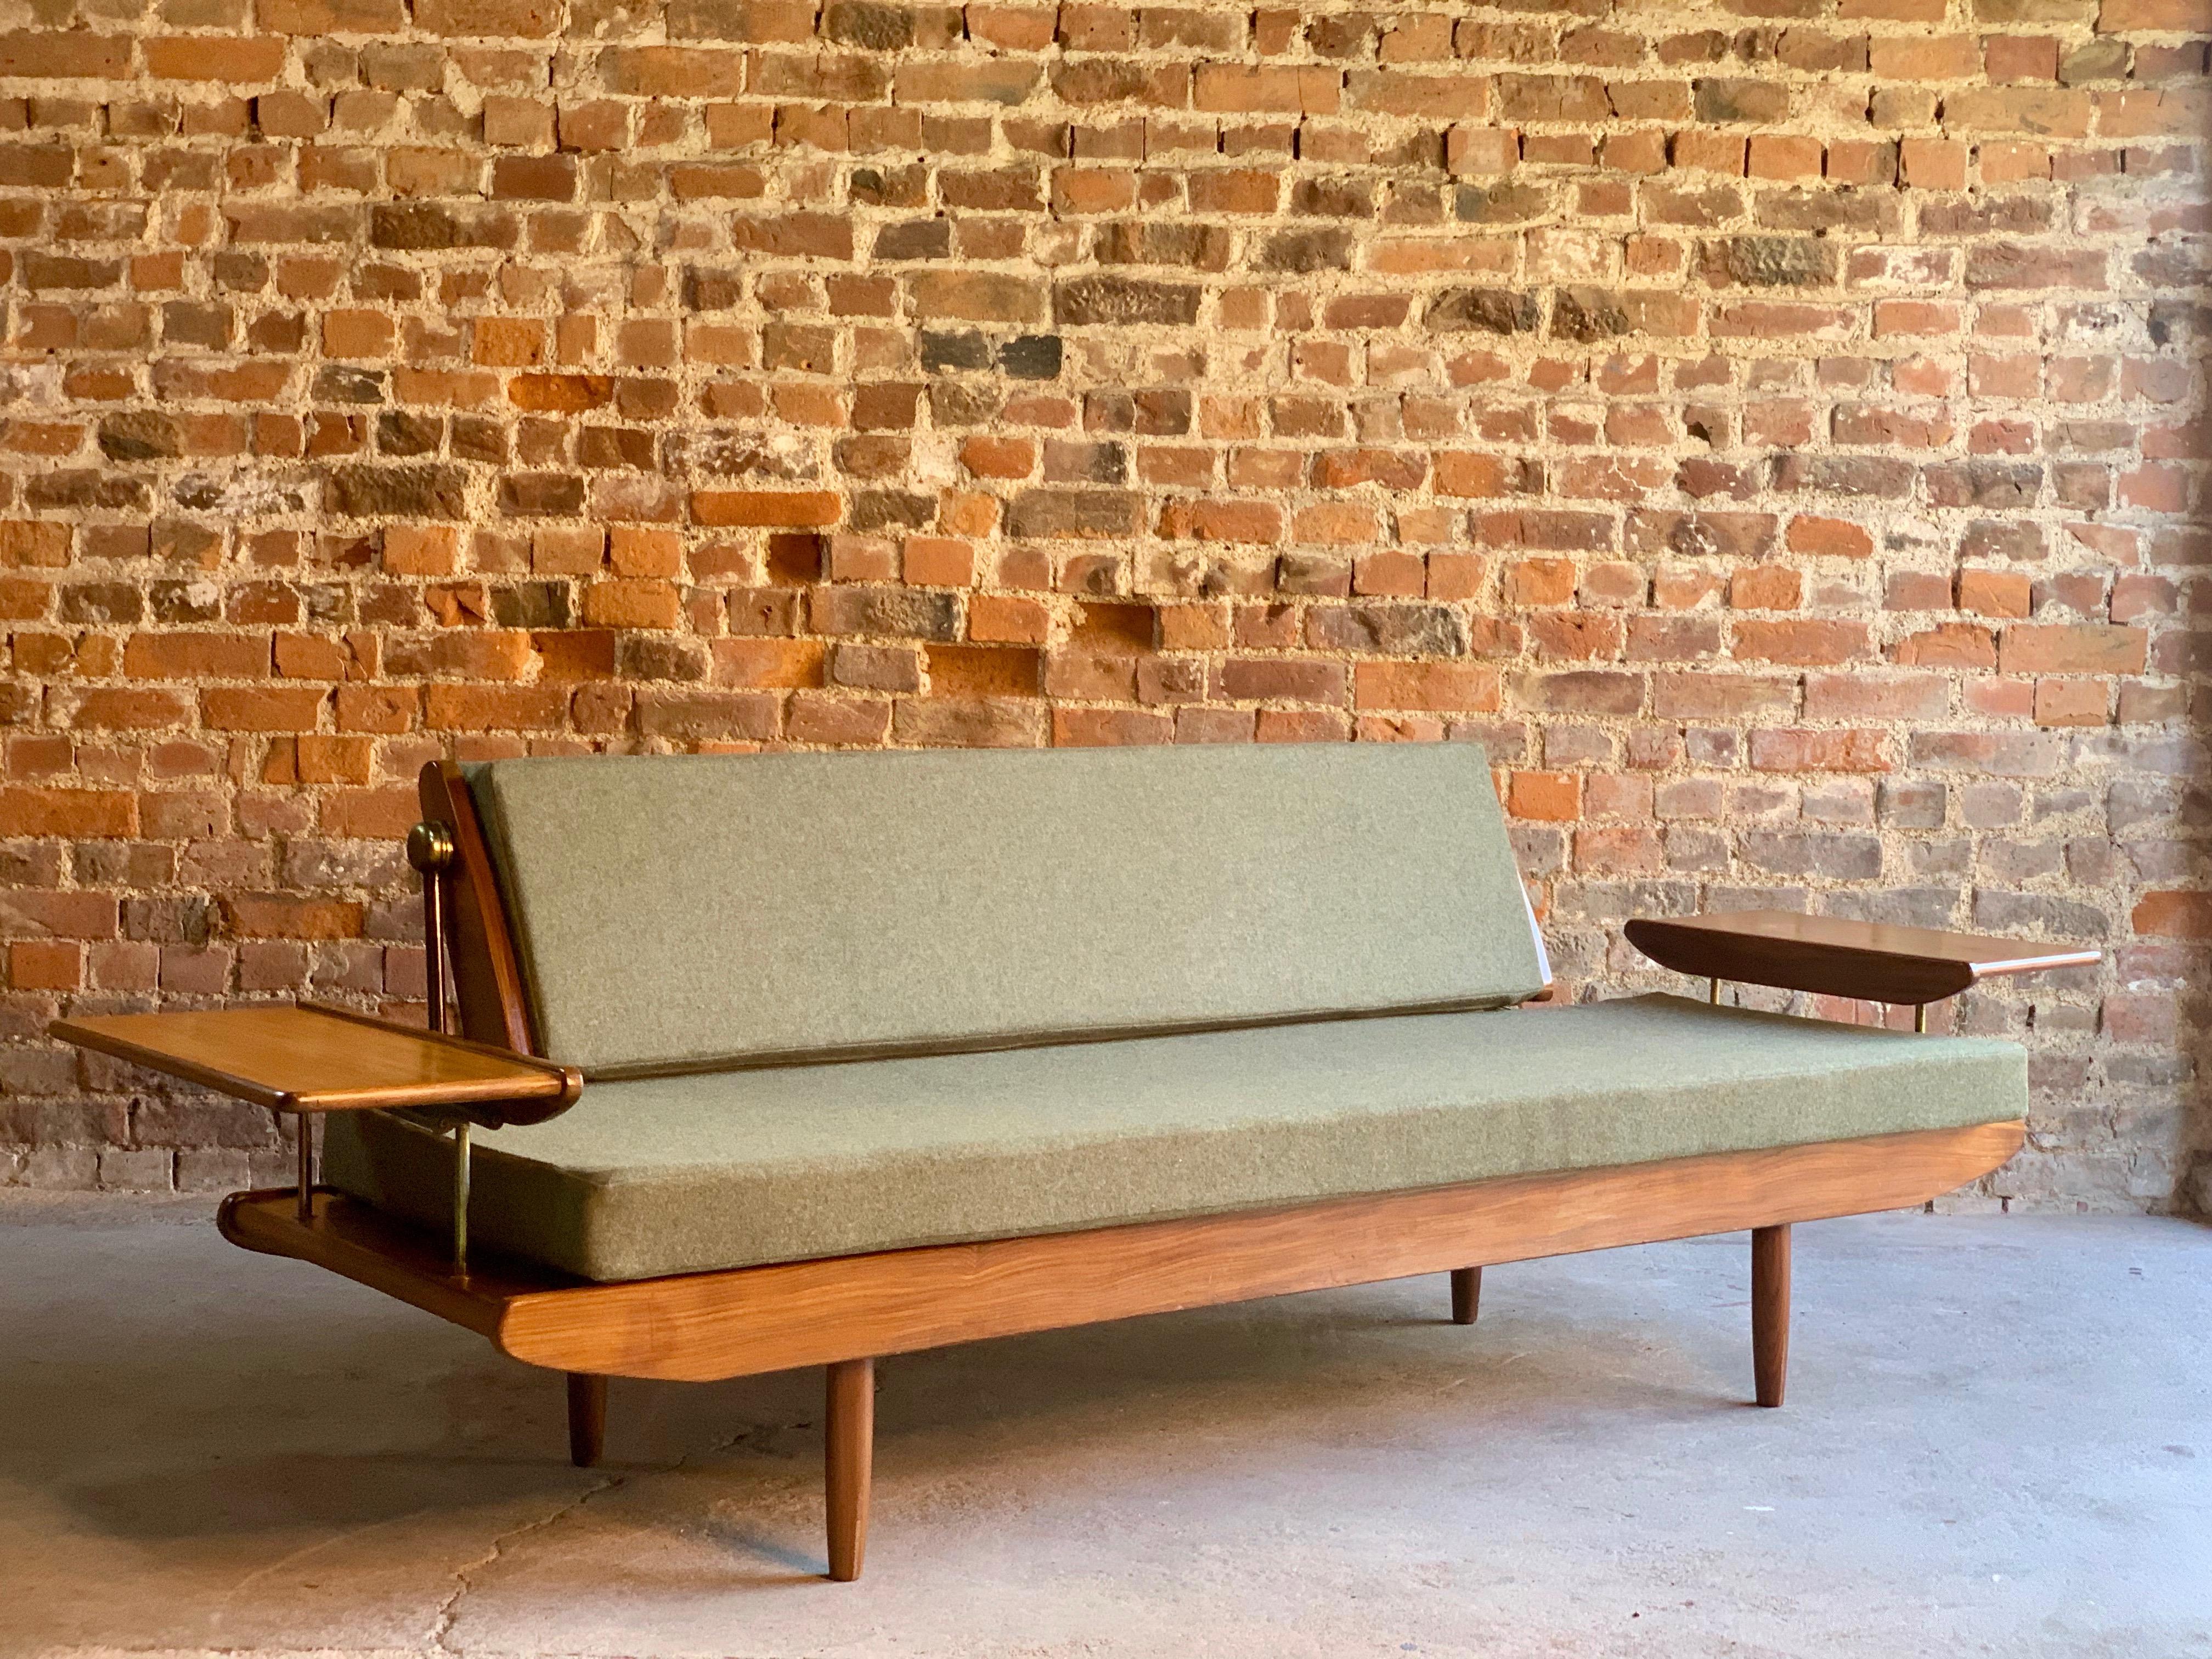 Midcentury Toothill 'Wentworth' Afromosia teak sofa daybed, circa 1960

Magnificent midcentury 'Wentworth' Afromosia teak sofa / daybed by British furniture maker Toothil and sold through Harrods, circa 1960, constructed from solid afromosia teak,